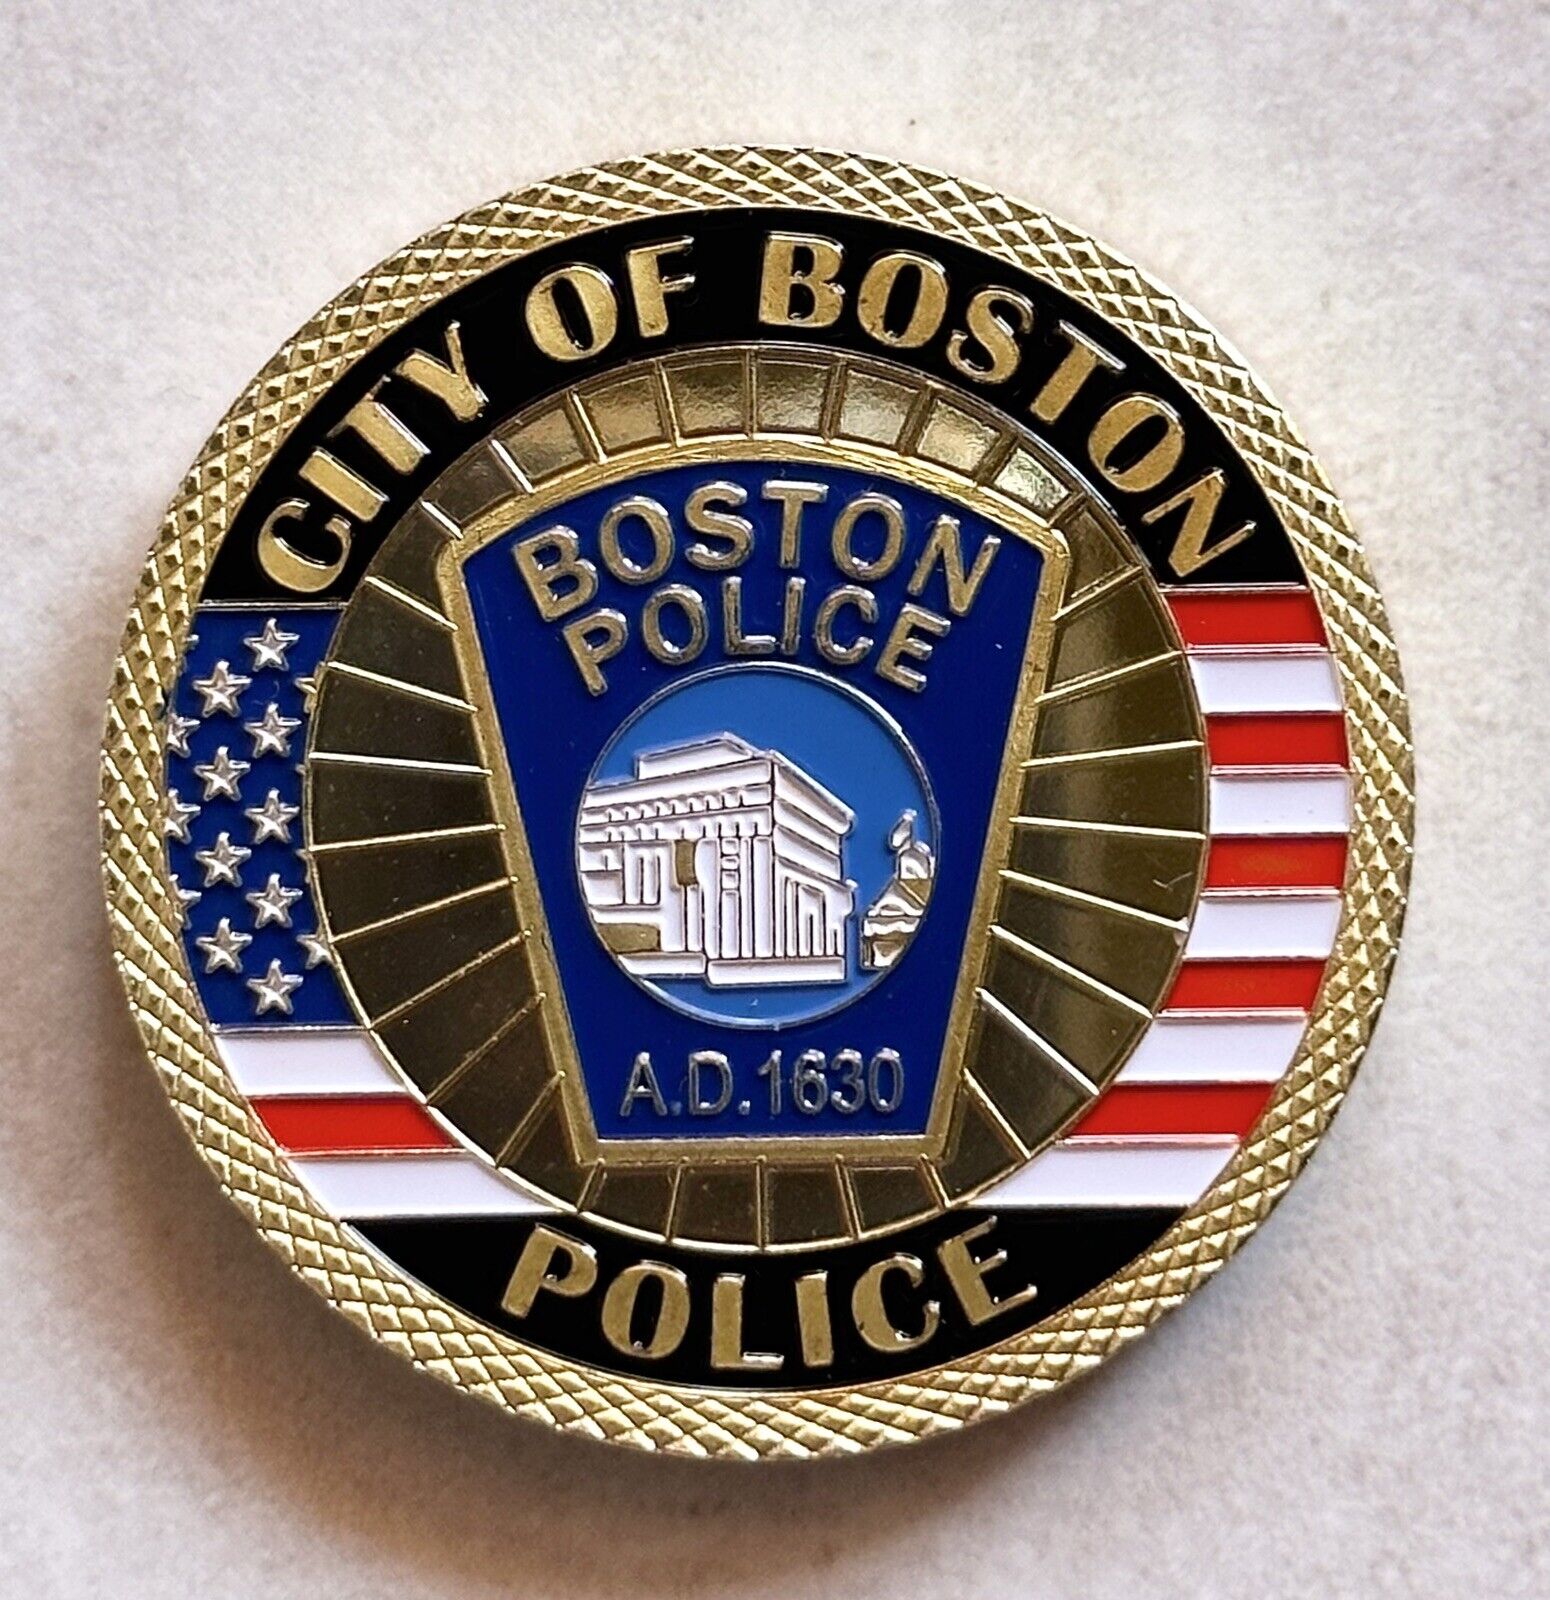 CITY OF BOSTON POLICE DEPT Challenge Coin